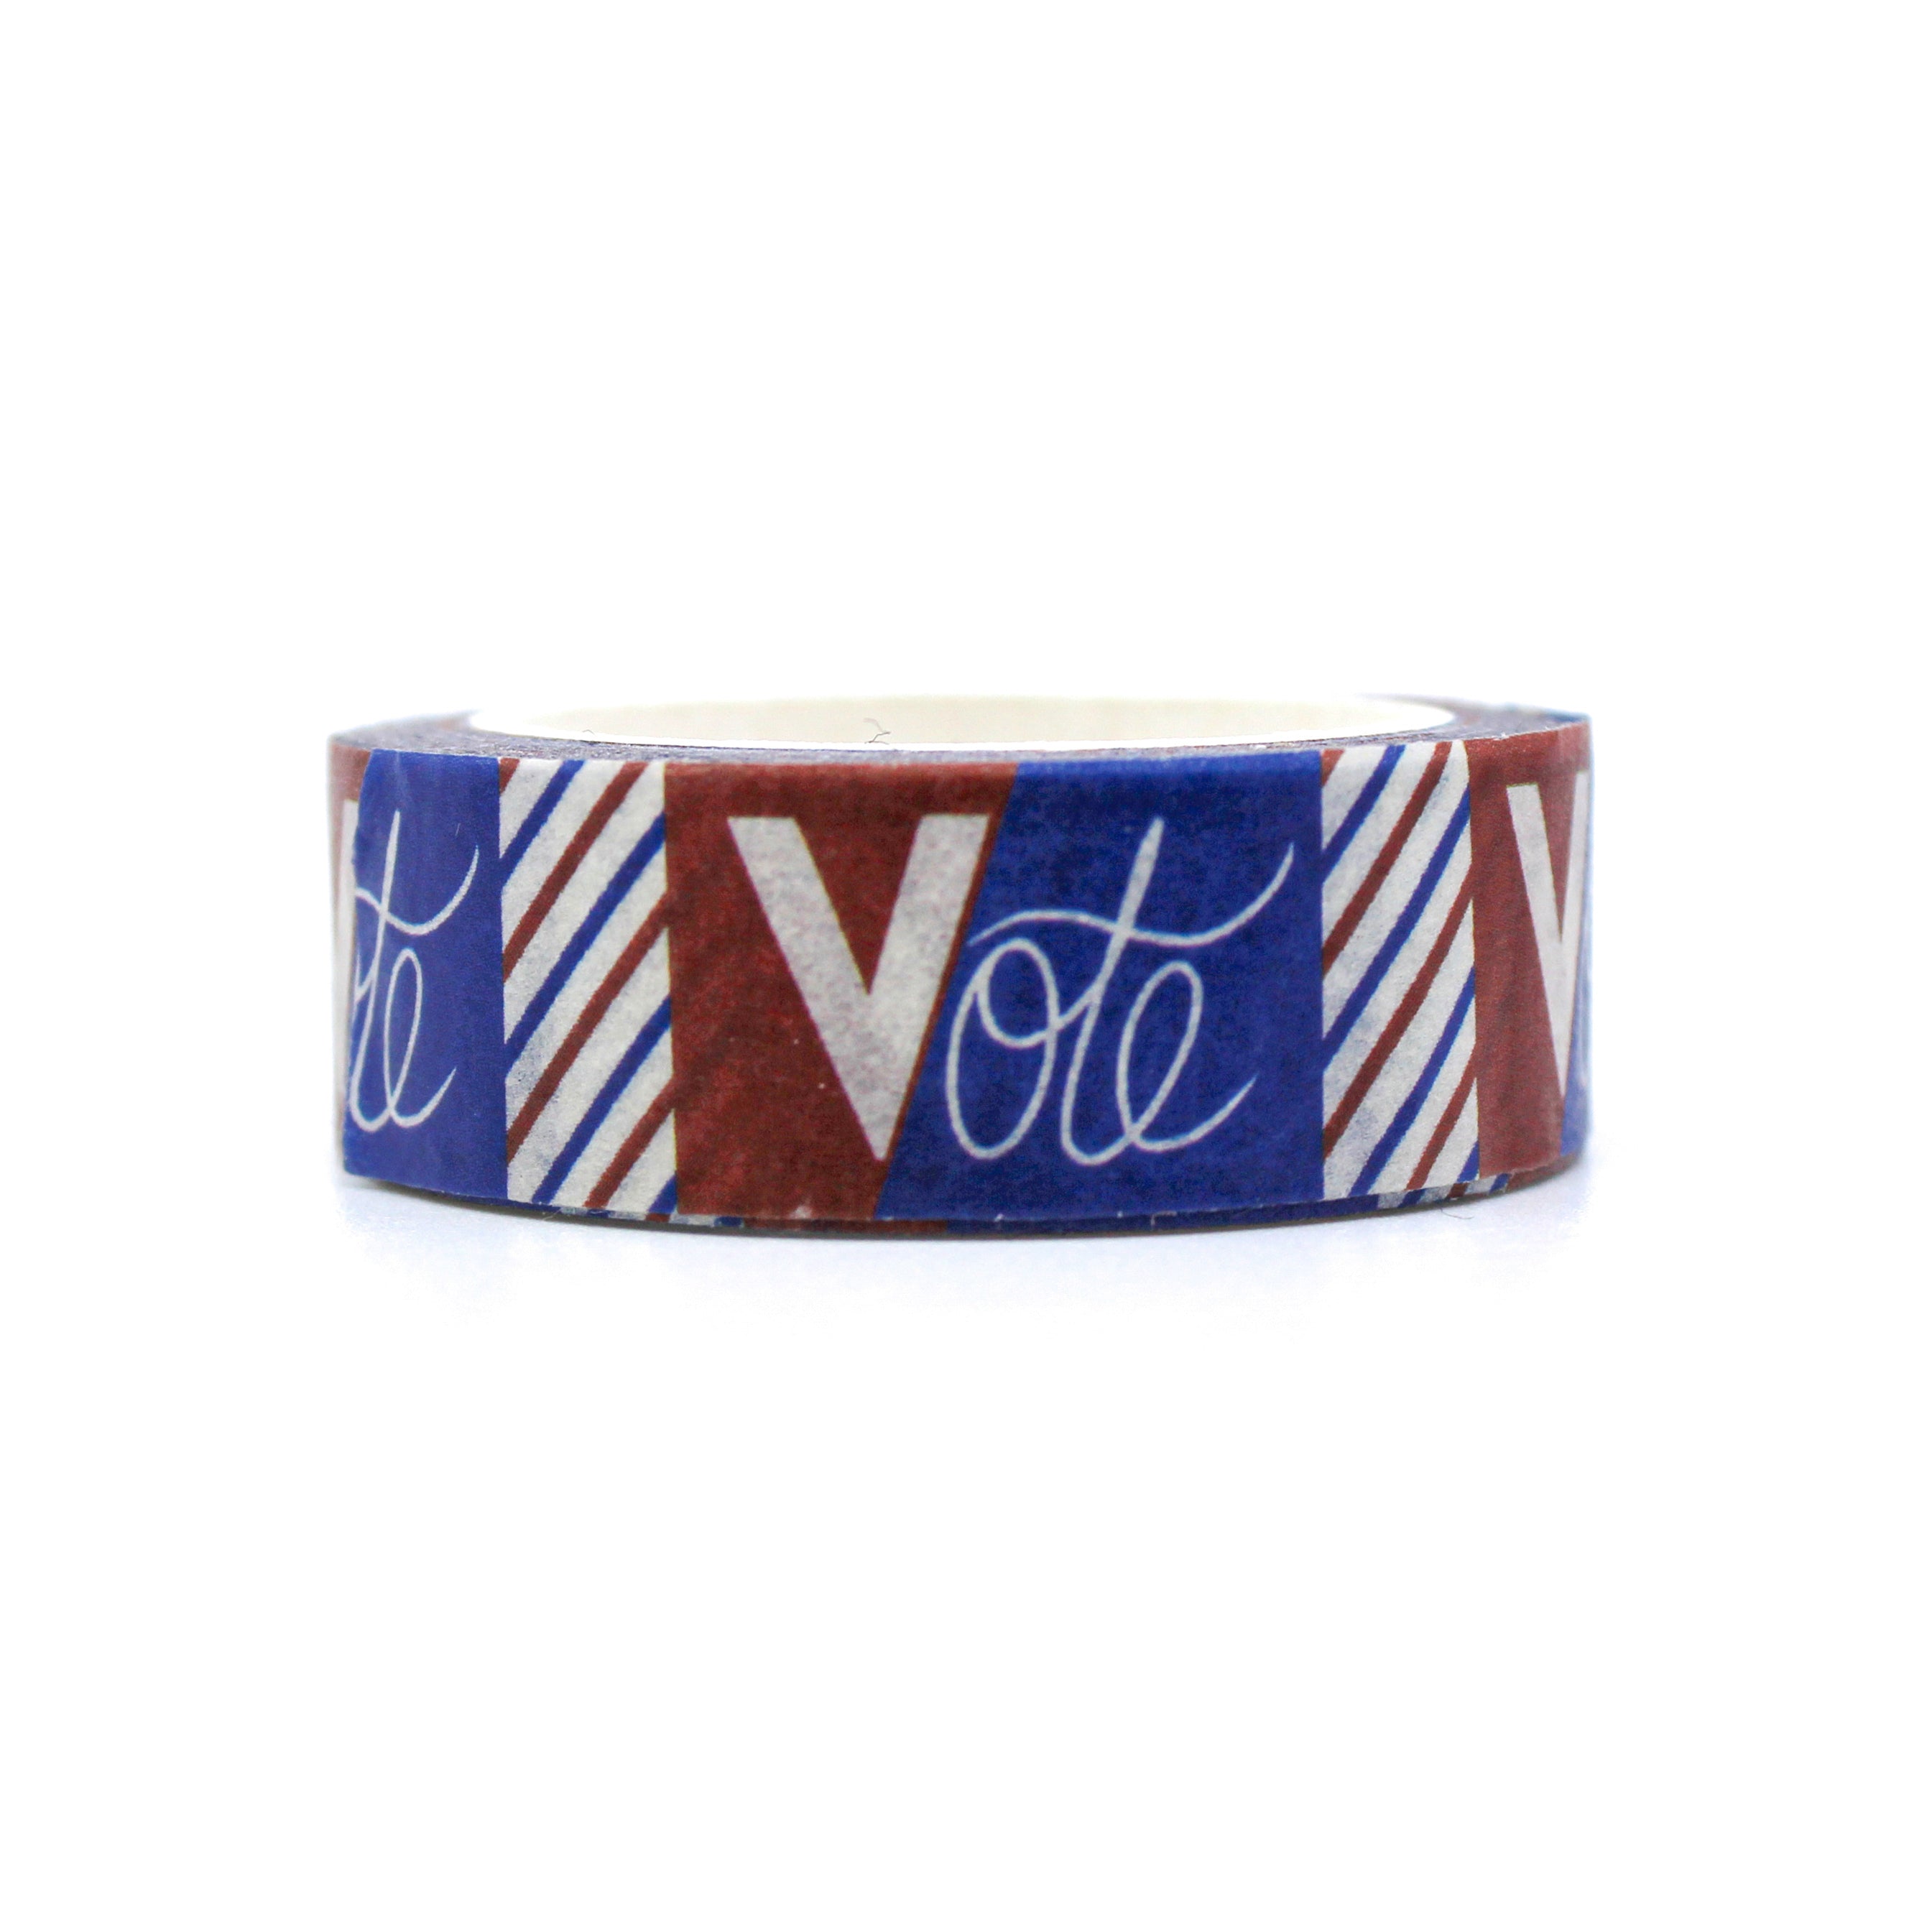 This is a red, white, and blue vote ballot washi tape from BBB Supplies Craft Shop